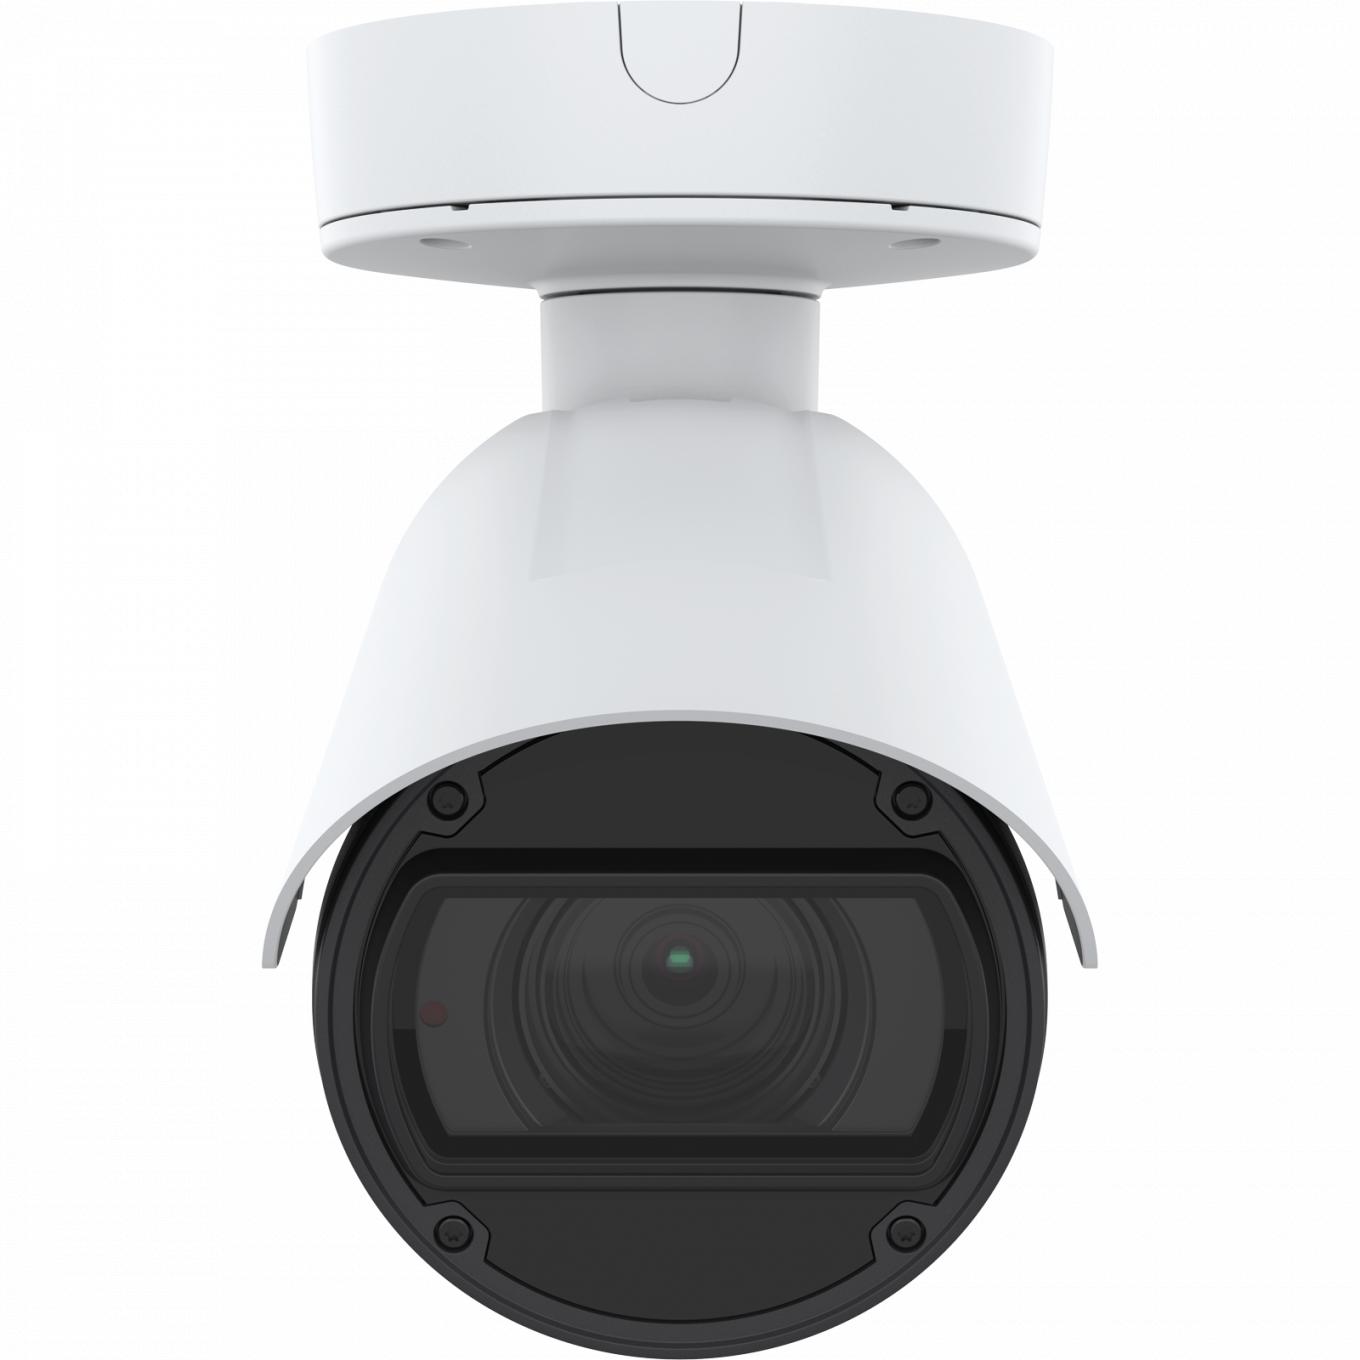 AXIS Q1785-LE IP Camera has OptimizedIR. The product is viewed from its front.